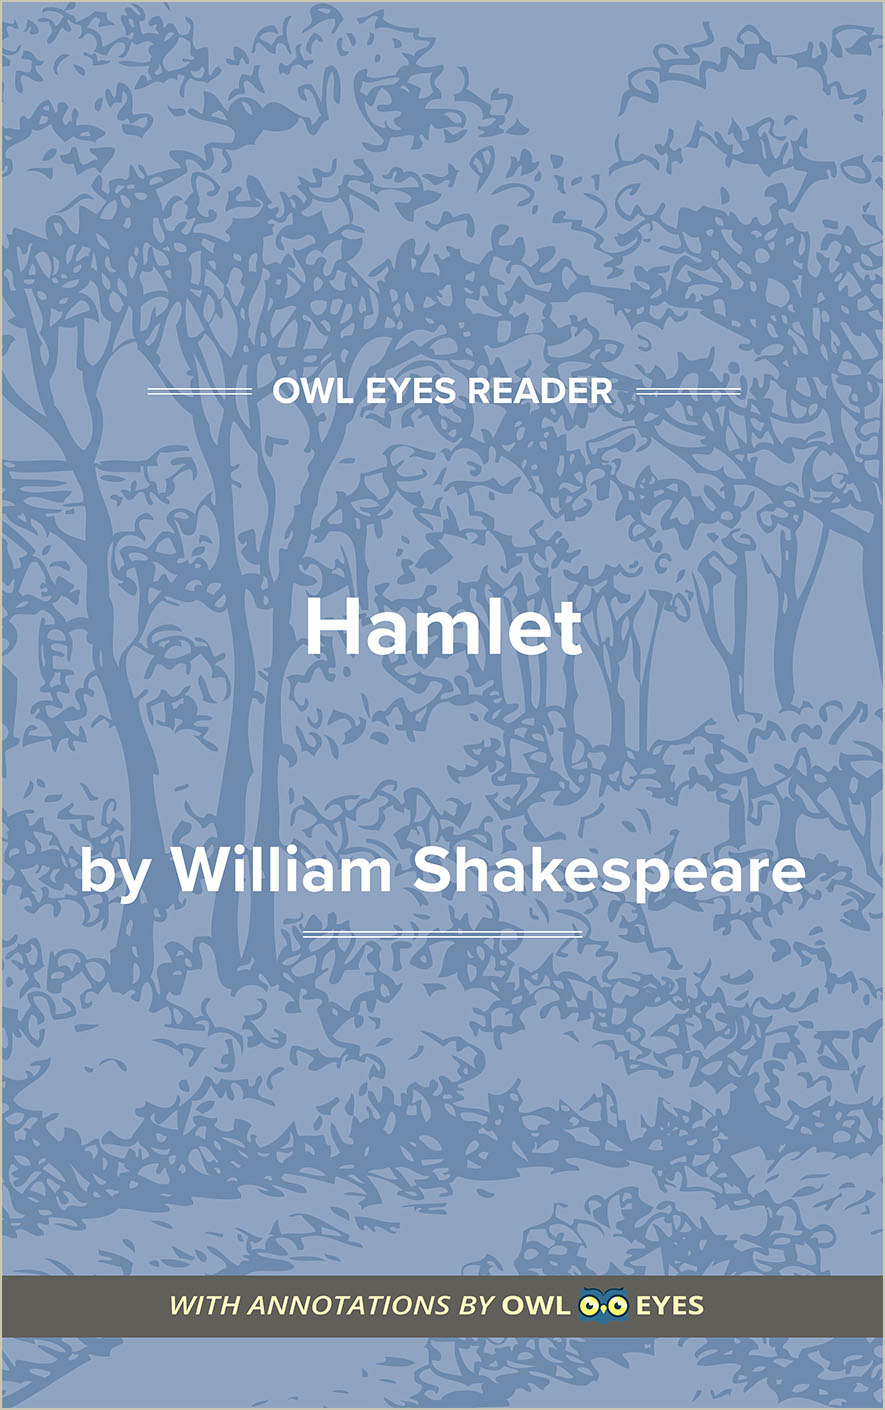 literary devices used in hamlet act 2